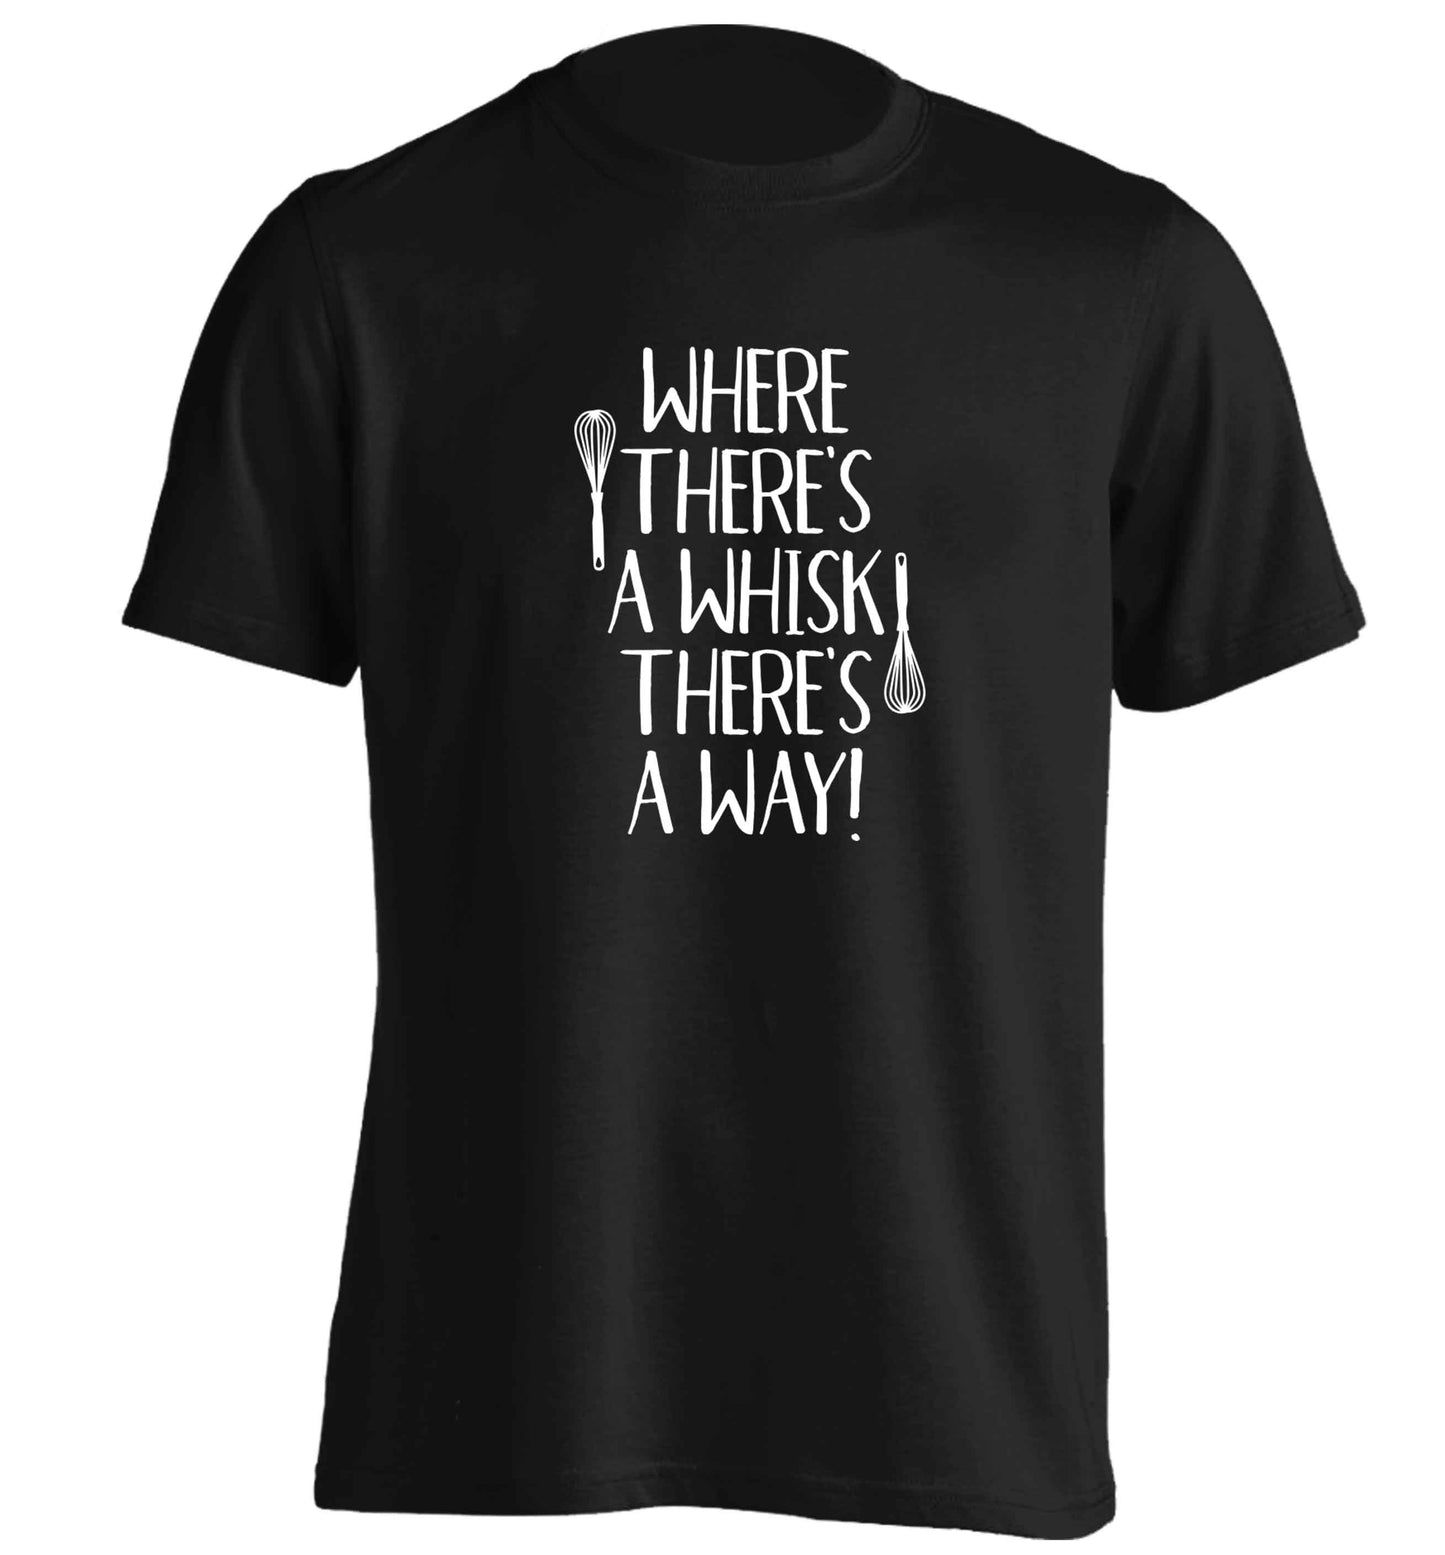 Where there's a whisk there's a way adults unisex black Tshirt 2XL